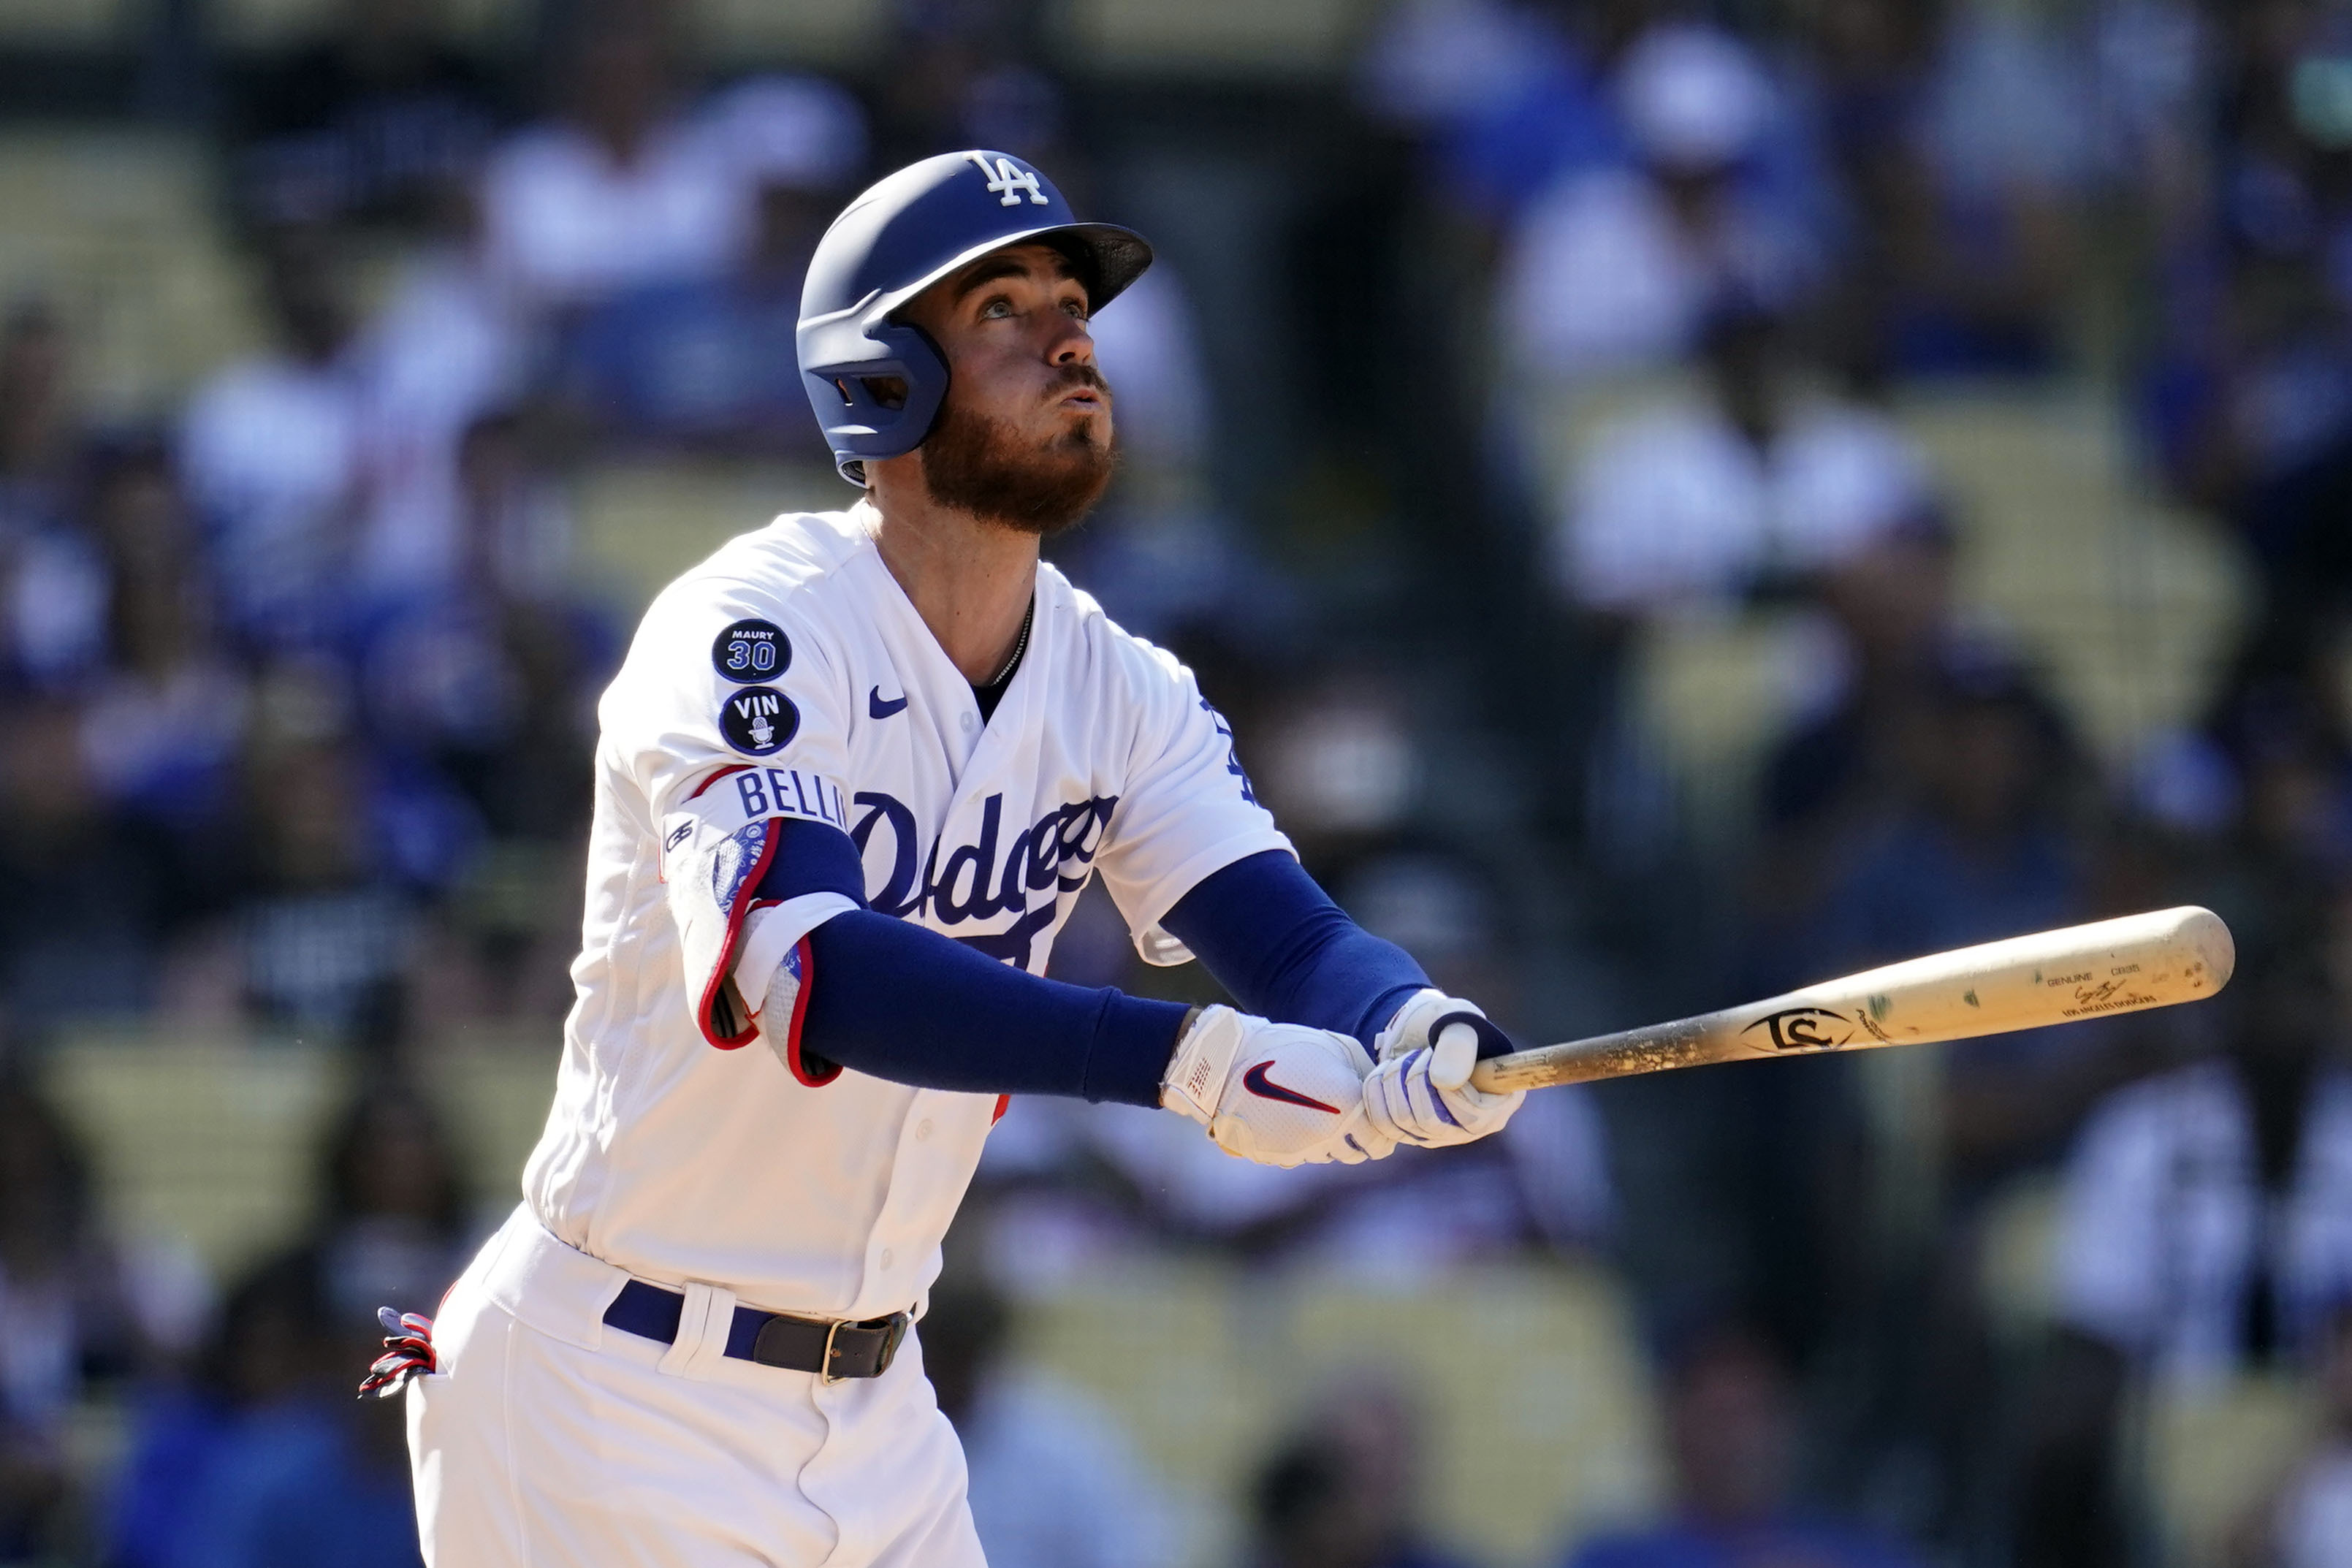 Chicago Cubs outfielder Cody Bellinger learned first base in a